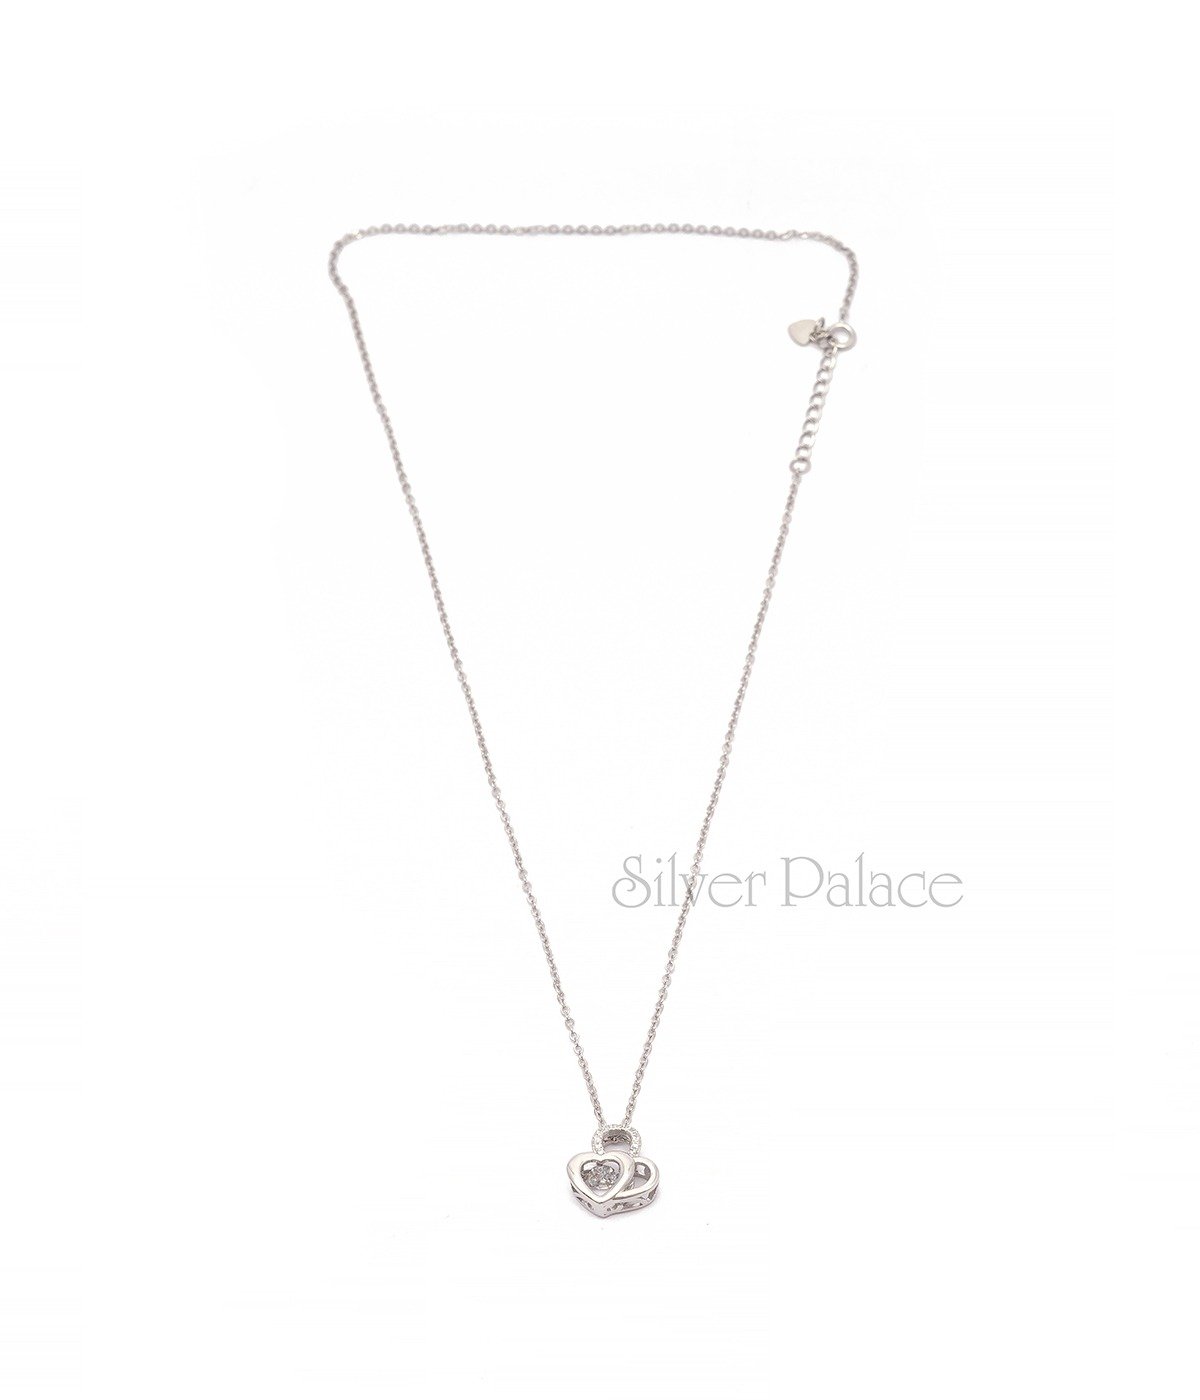 92.5 STERLING SILVER TINY DOUBLE HEART SHAPE PENDANT CHAIN